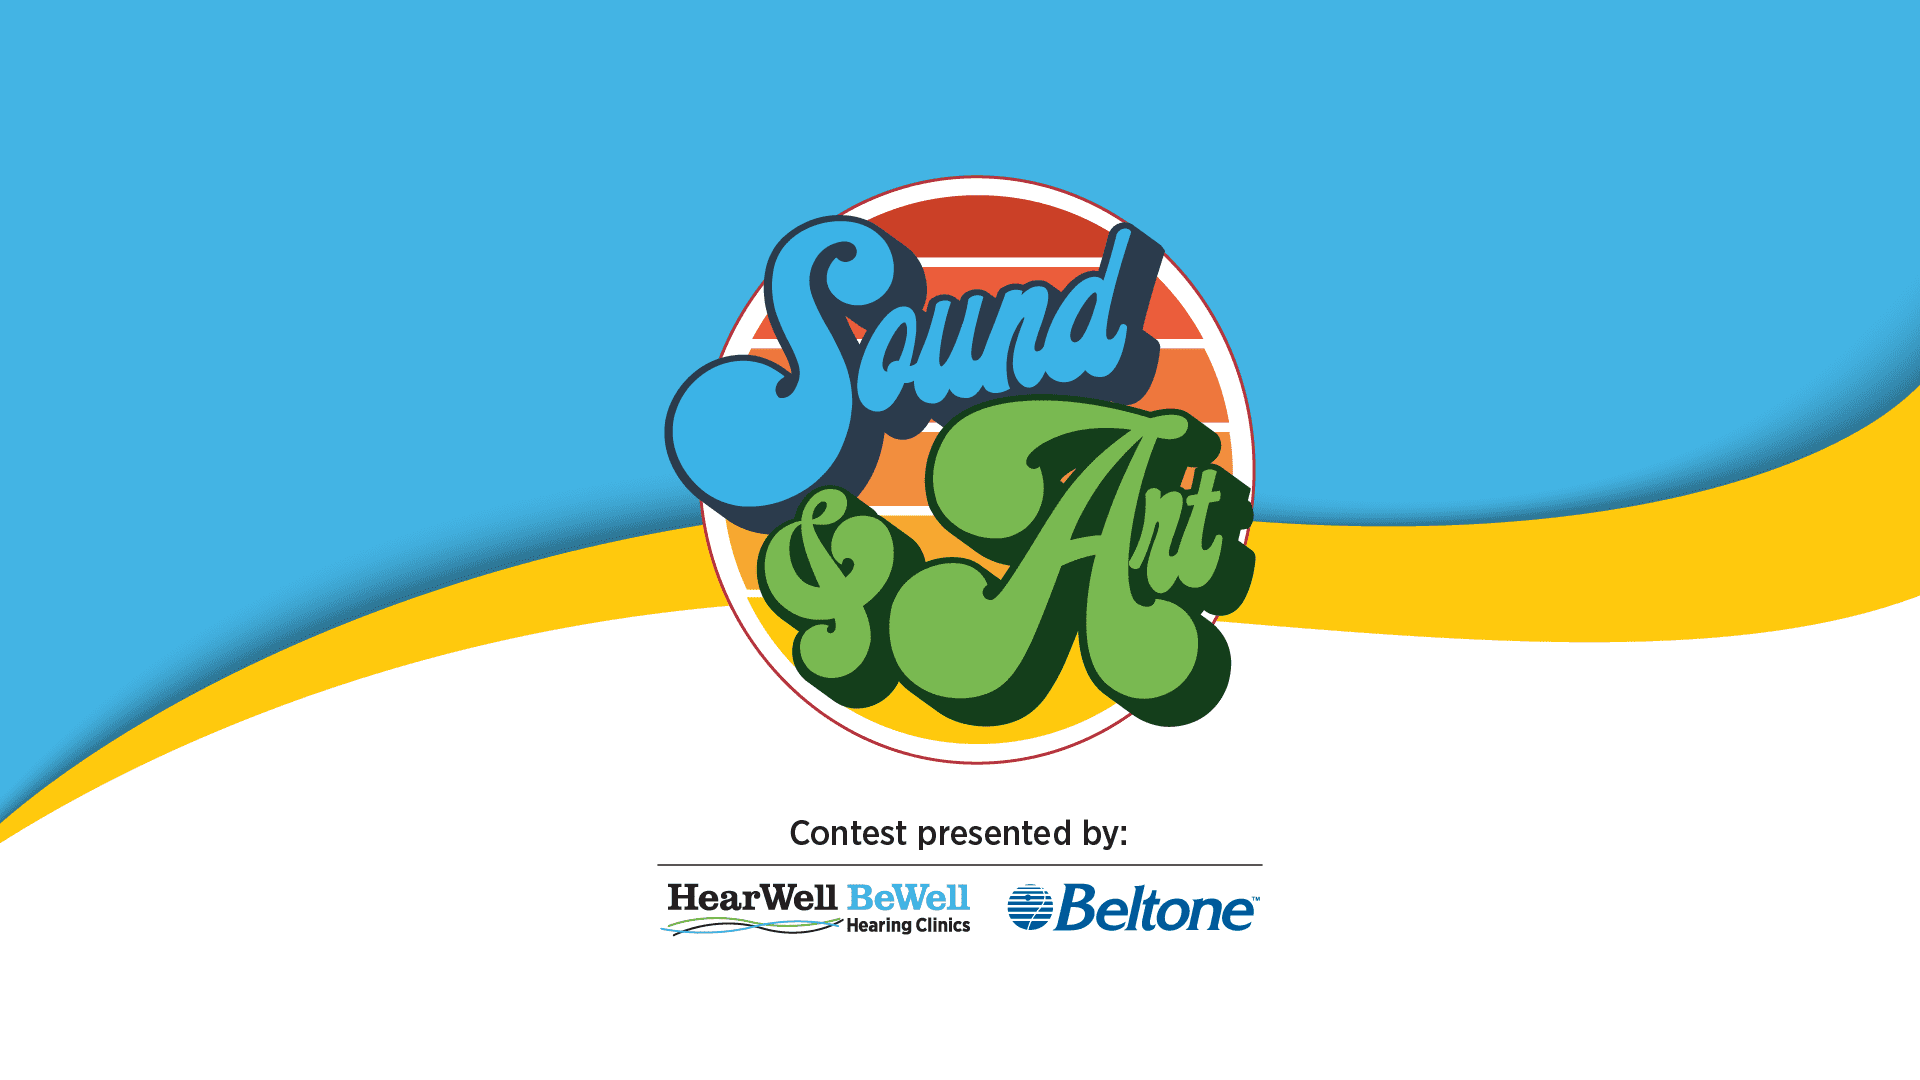 Sound & Art contest presented by HearWell BeWell hearing clinics and Beltone hearing aids